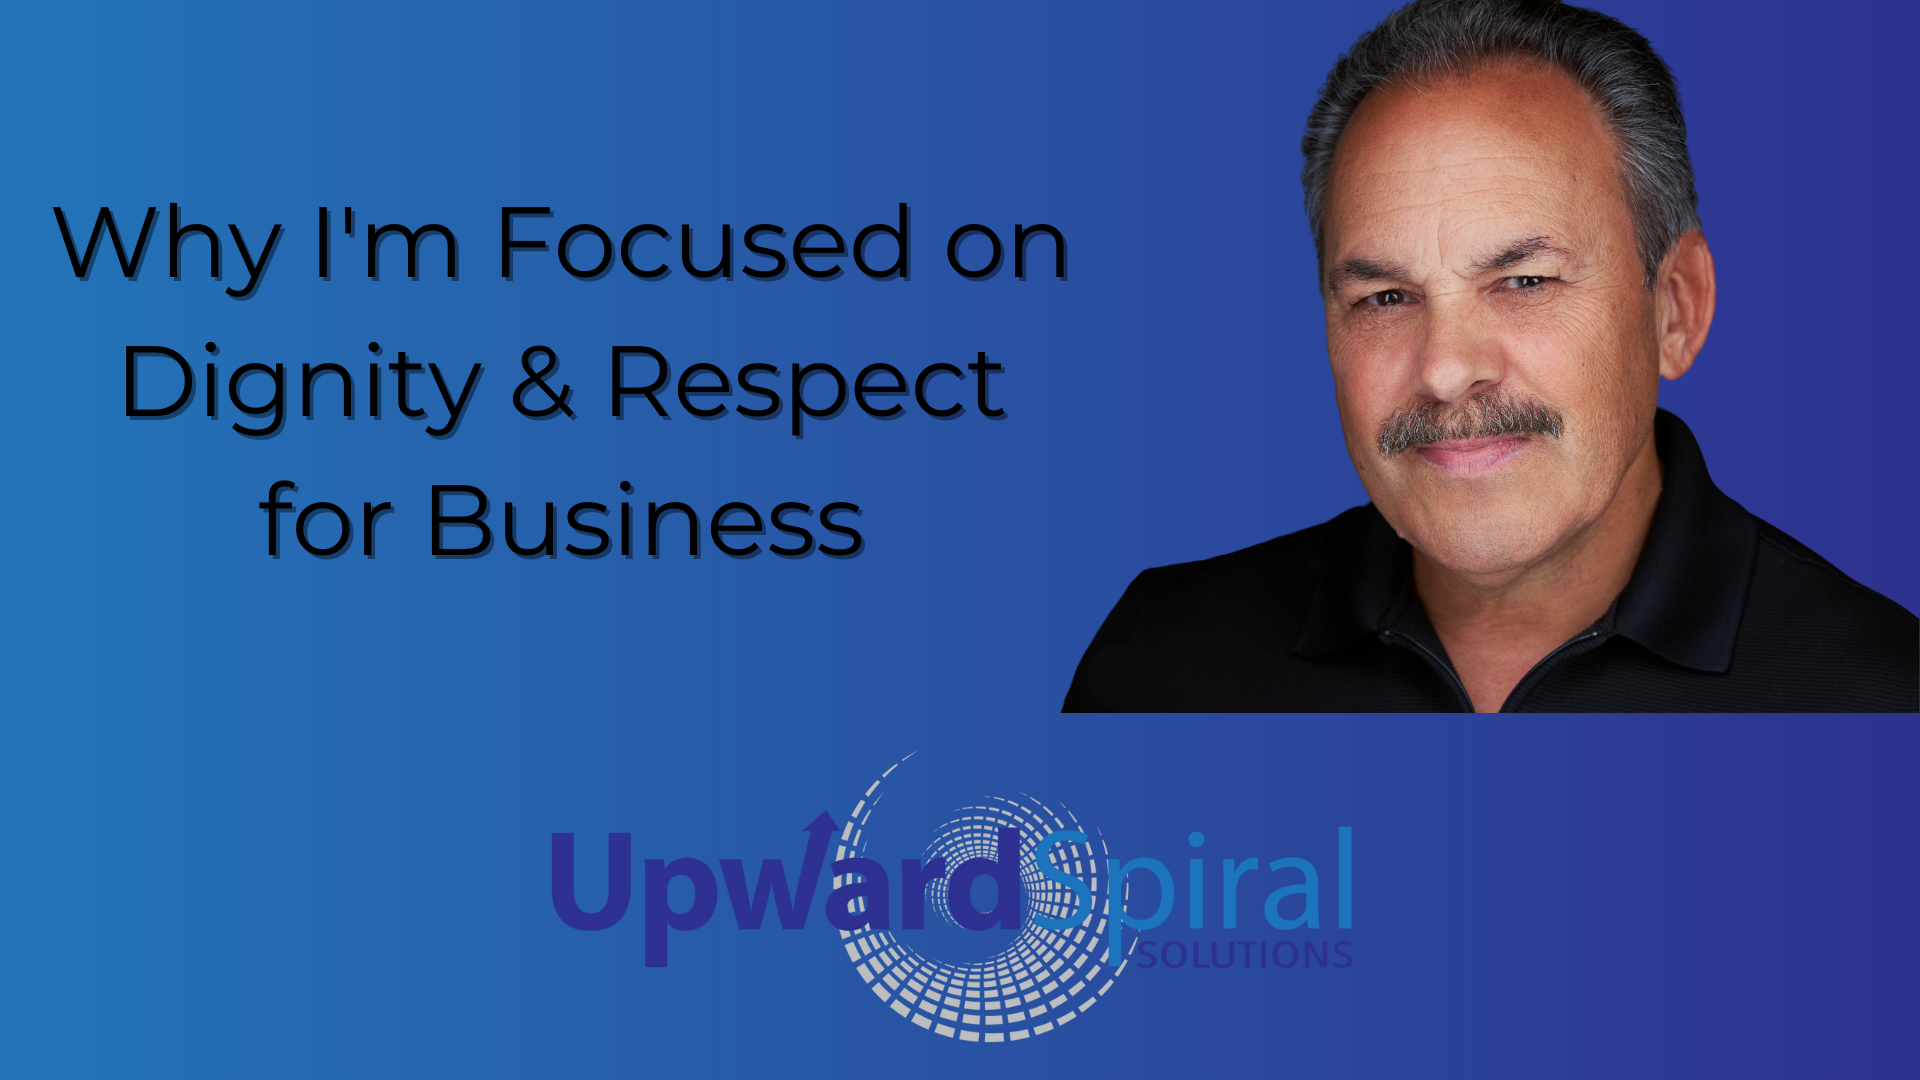 Why I switched from inhouse lawyer to entrepreneur focused on Dignity & Respect for Business.